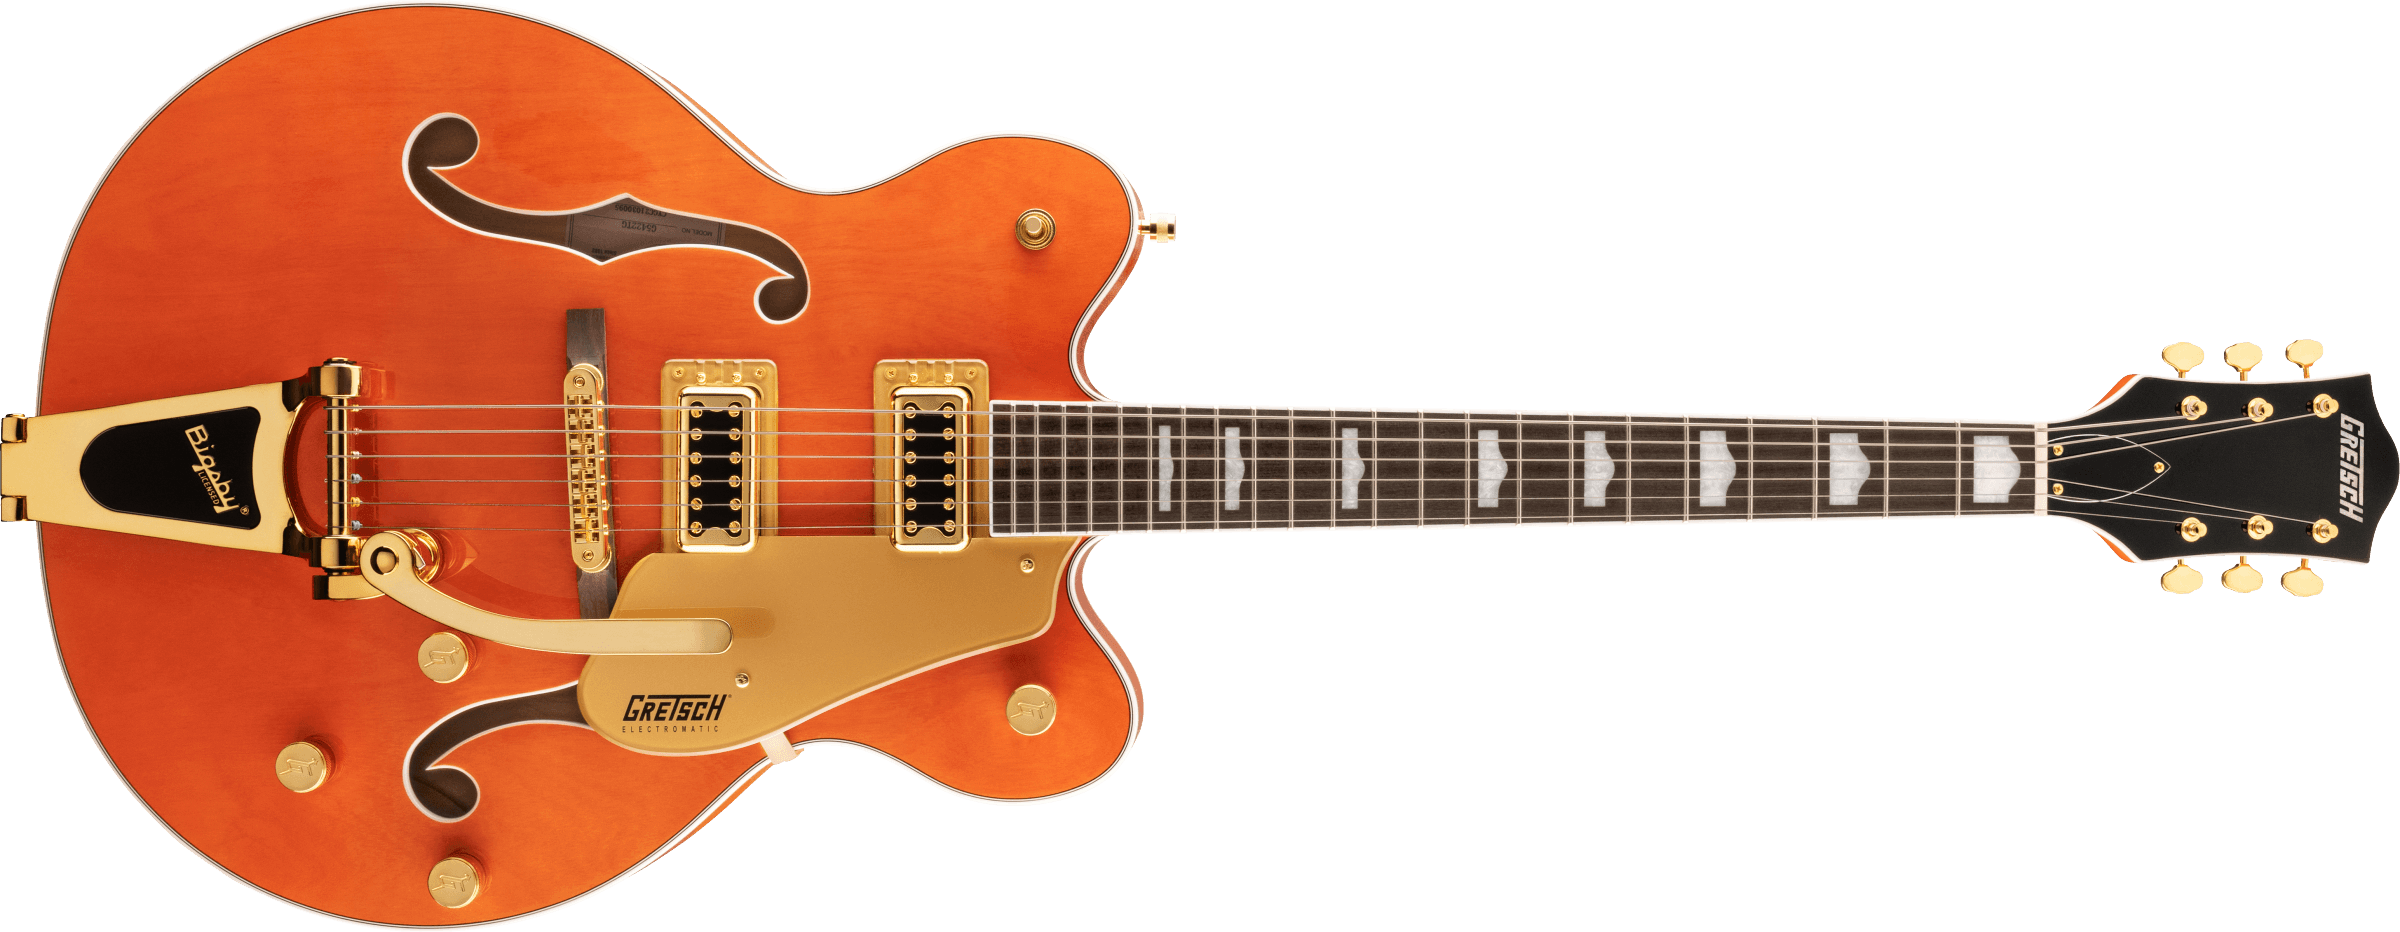 GRETSCH G5422TG Electromatic® Classic Hollow Body Double-Cut with Bigsby and Gold Hardware Orange Stain 2506217512